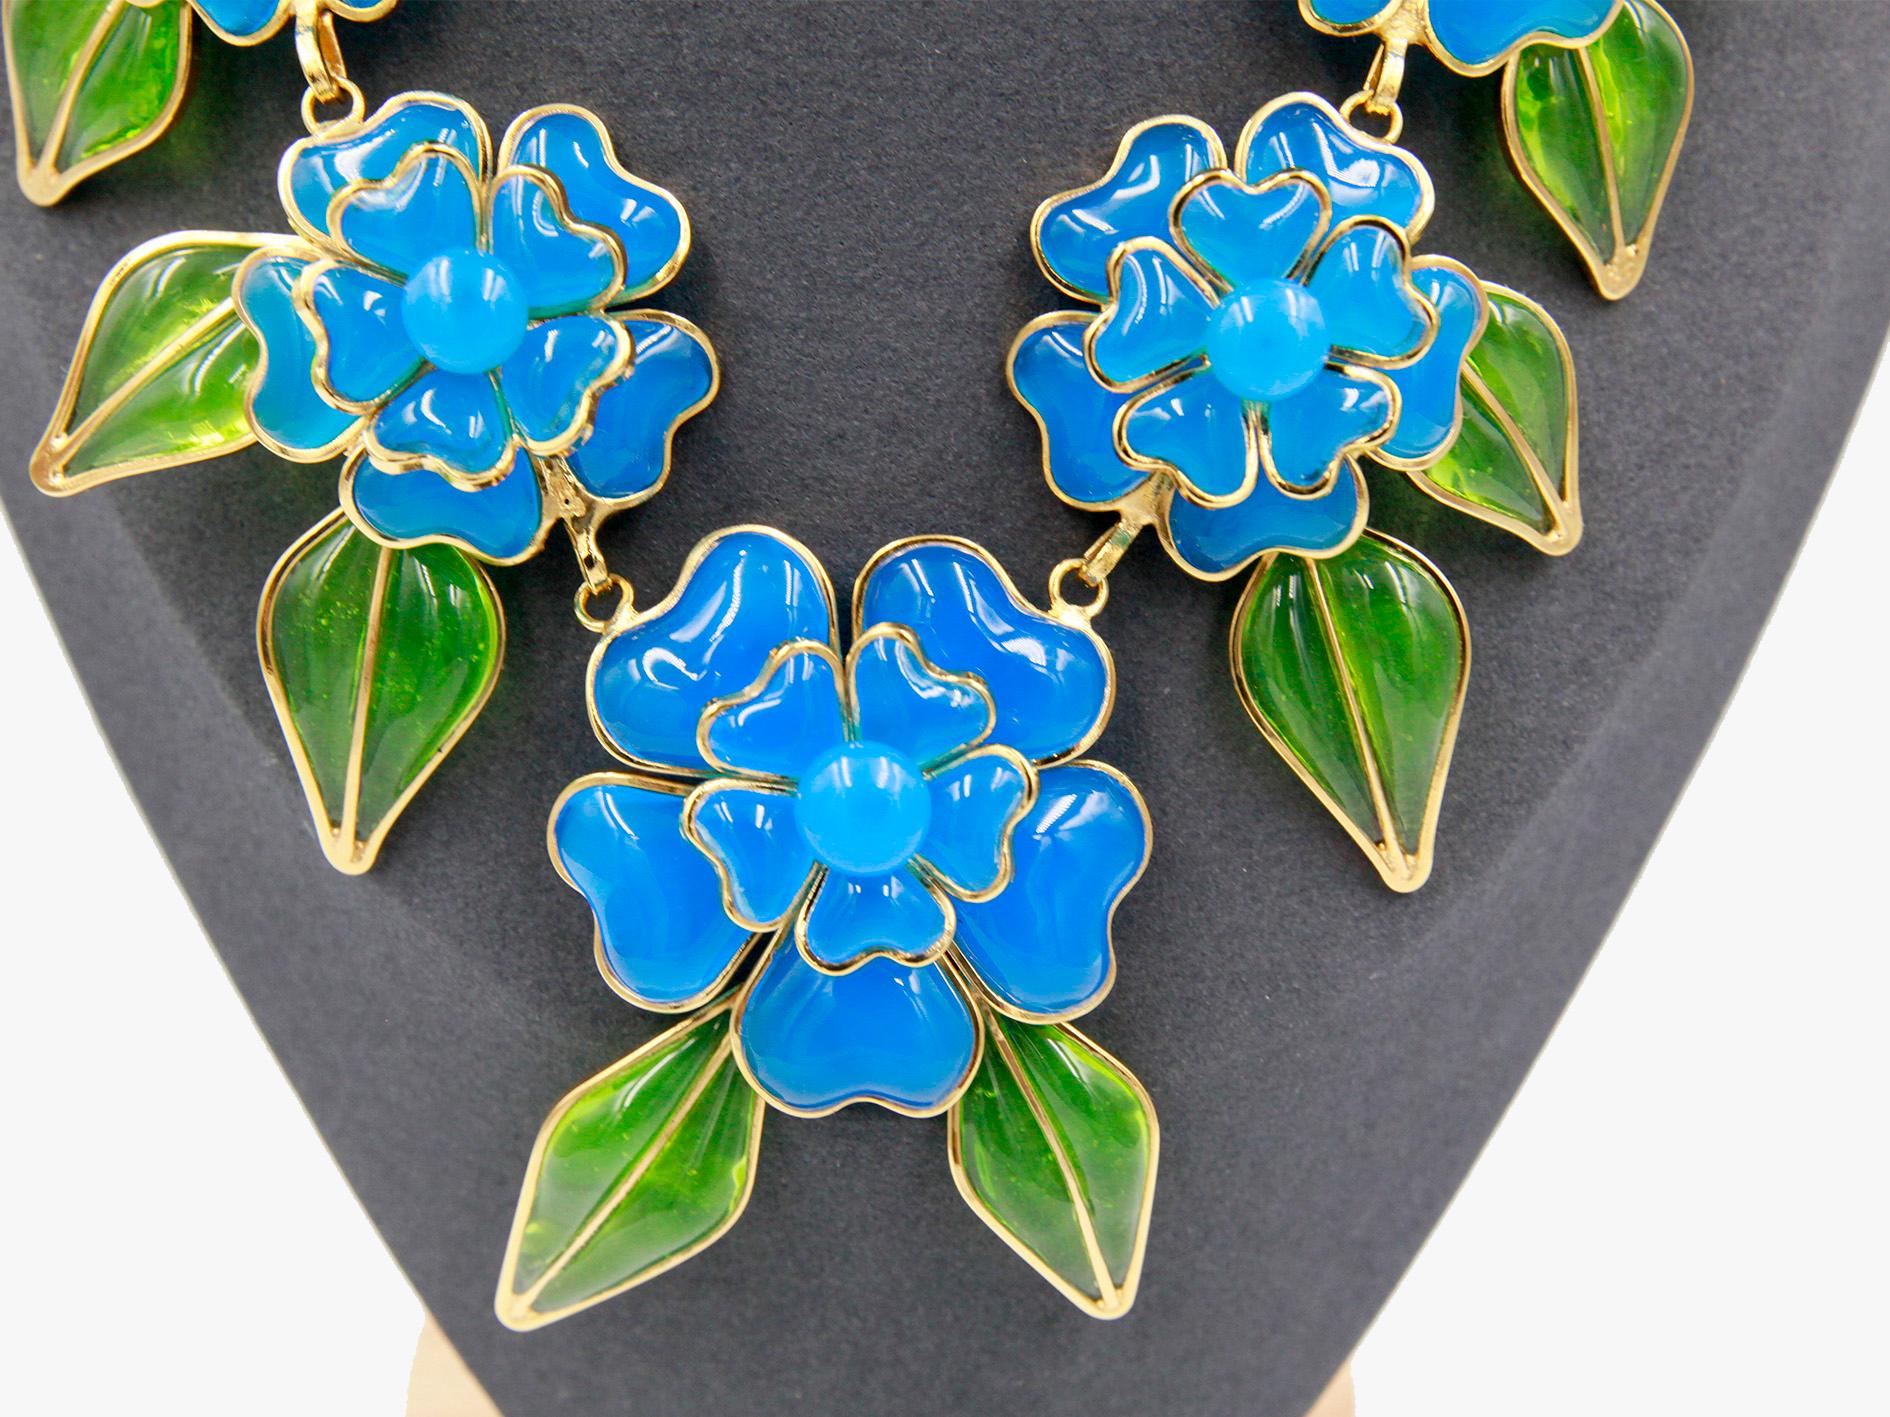 Vintage Augustine Gripoix Camelia necklace by Thierry Gripoix featuring blue glass flowers and green petals. 
Gold plated metal, Gripoix pate de verre. 
Signed.
Period: 1990s
Excellent condition.
Please note the item is fragile since it is made of